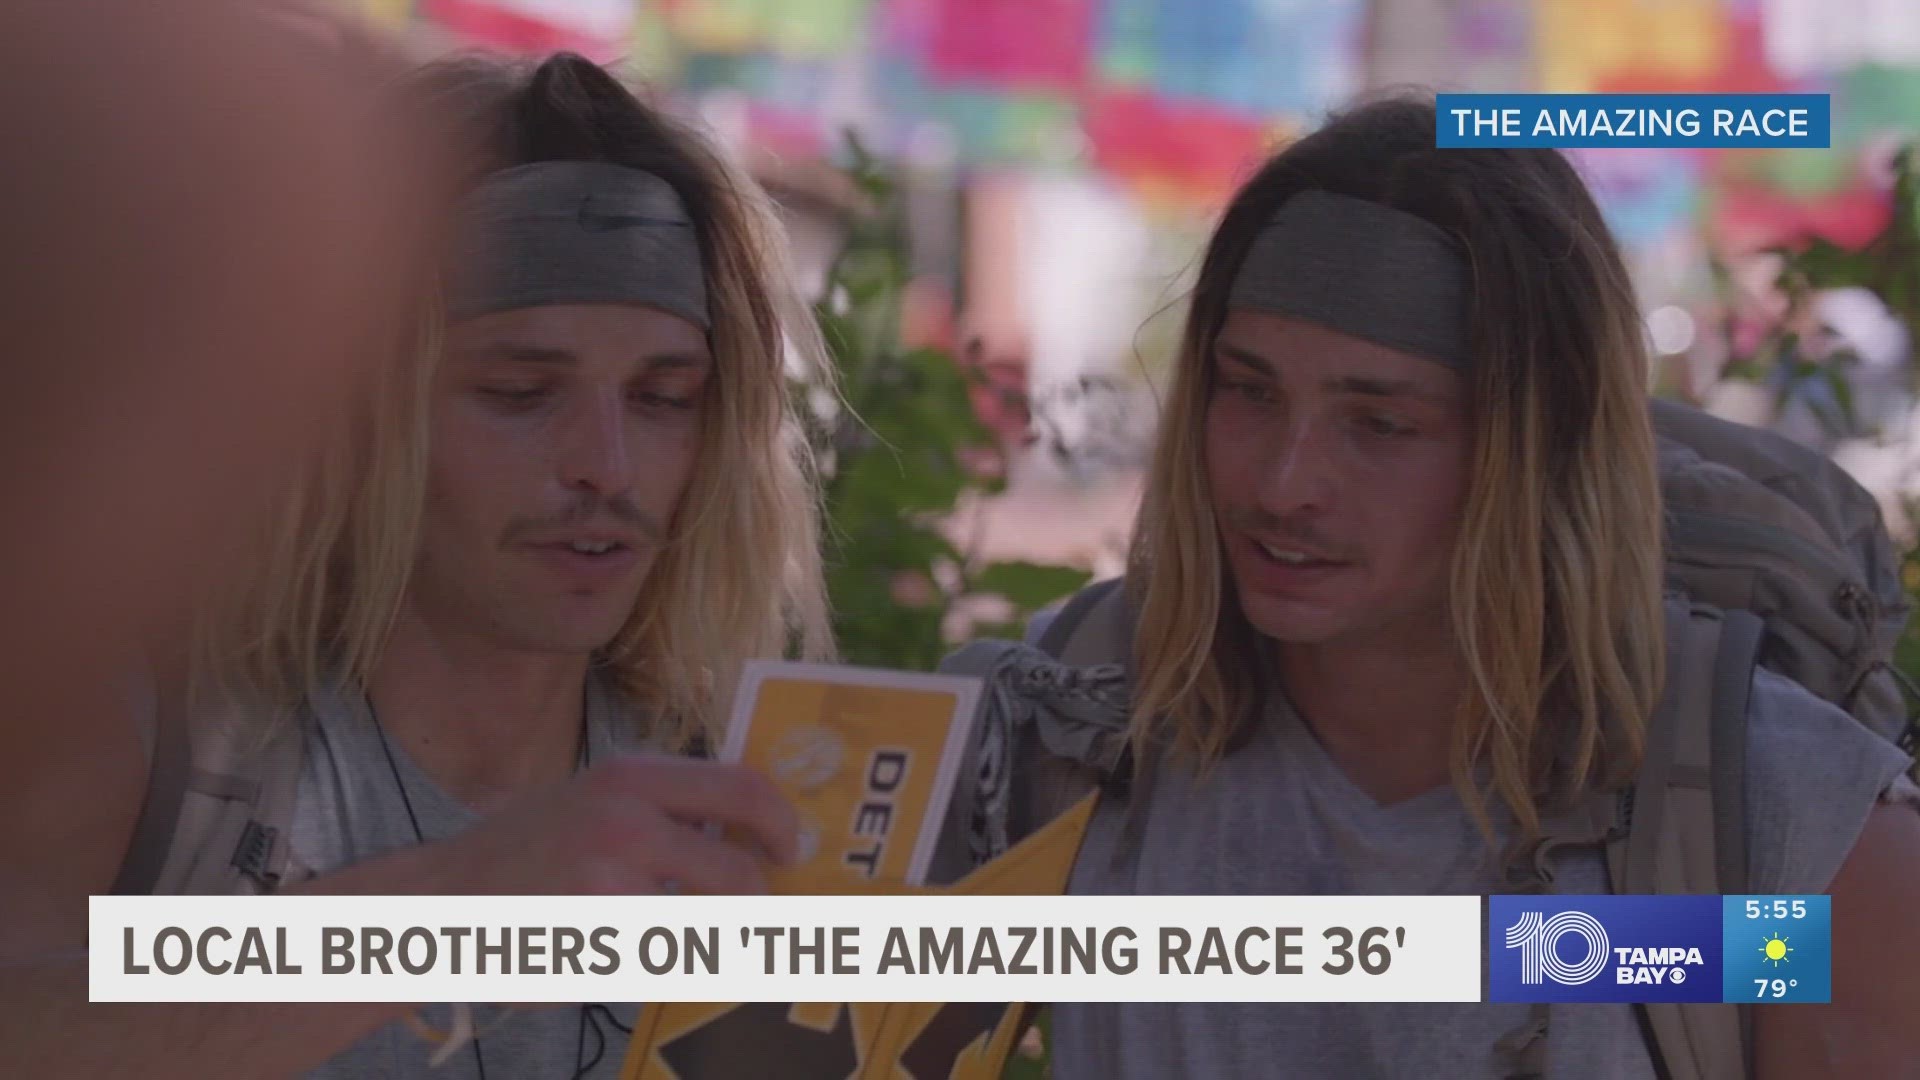 The new season of 'The Amazing Race' kicks off at 9:30 p.m. on Wednesday, March 13.